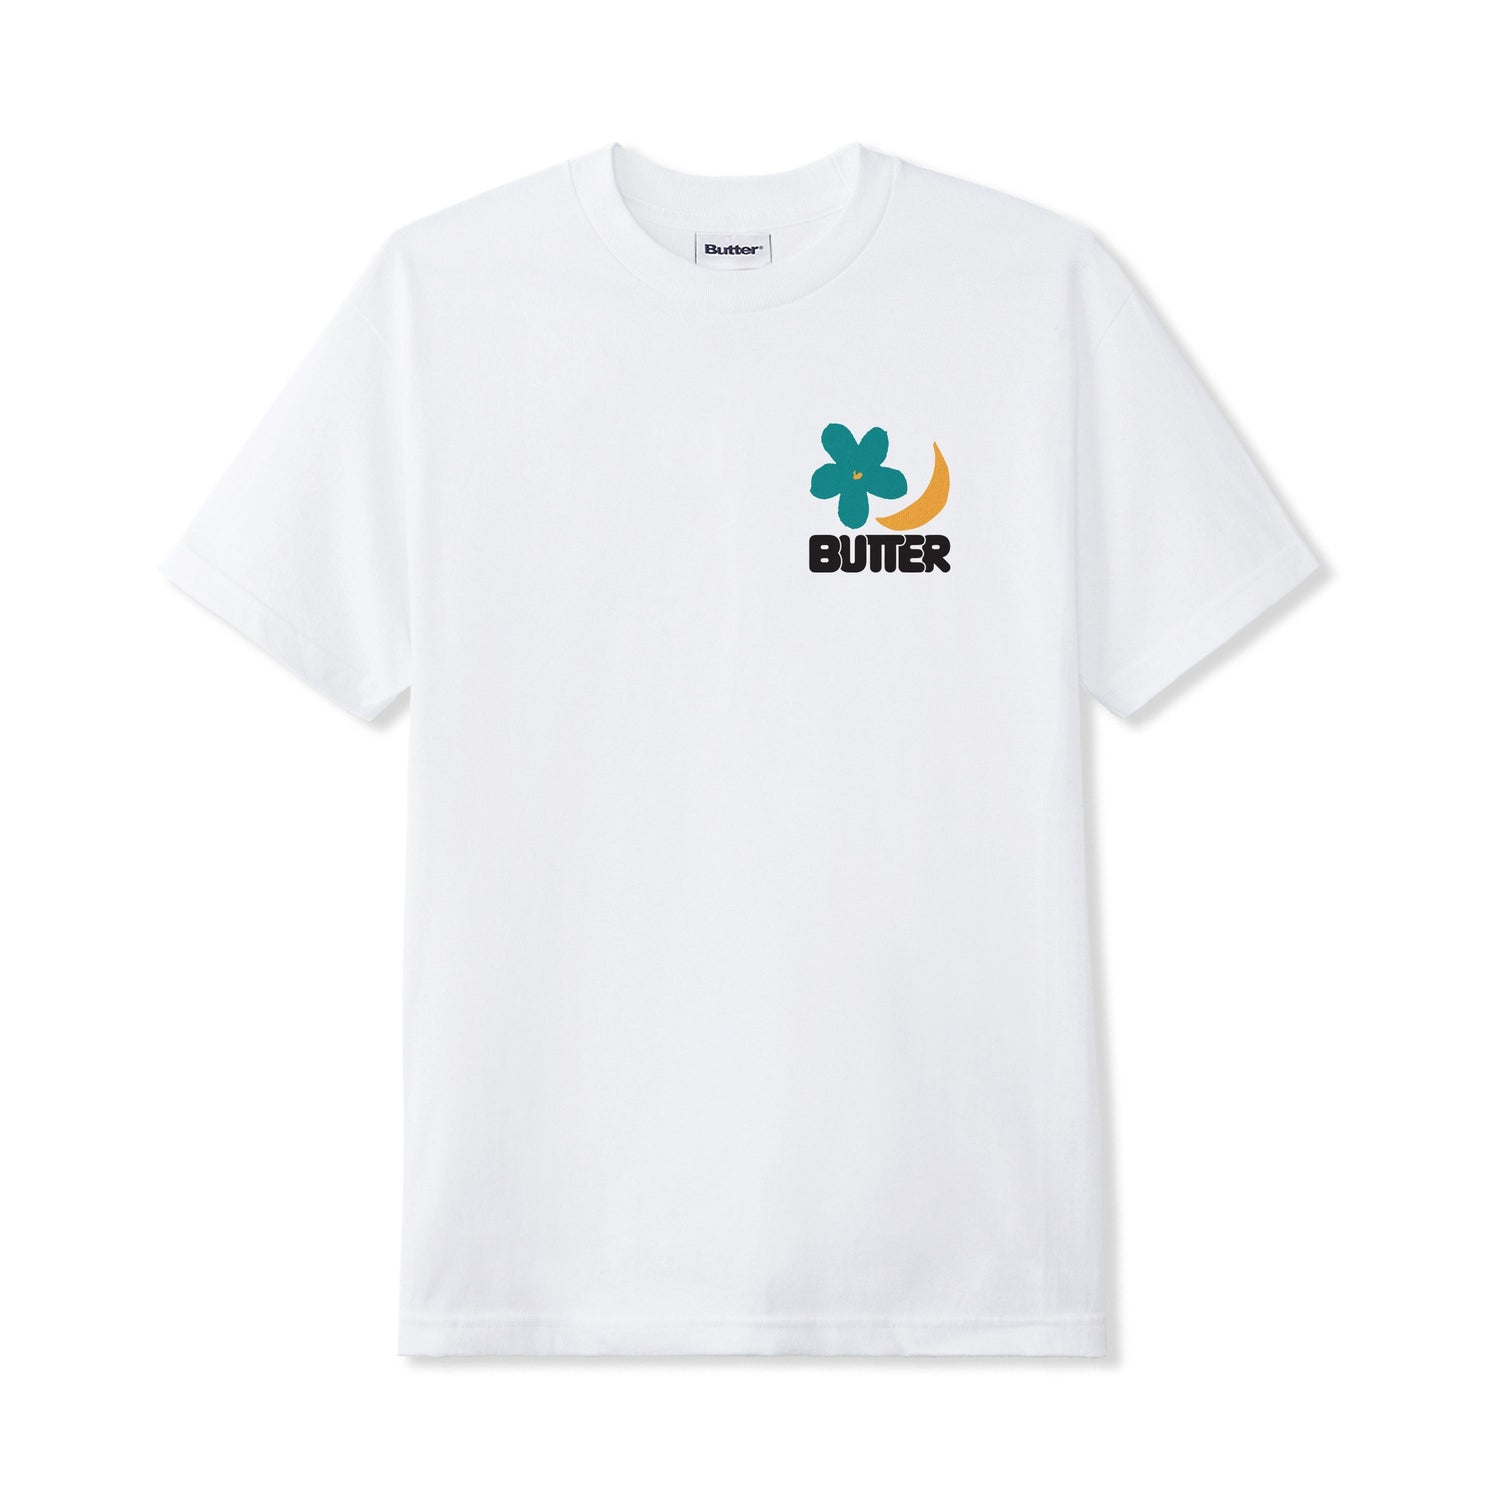 Simple Materials Tee, White